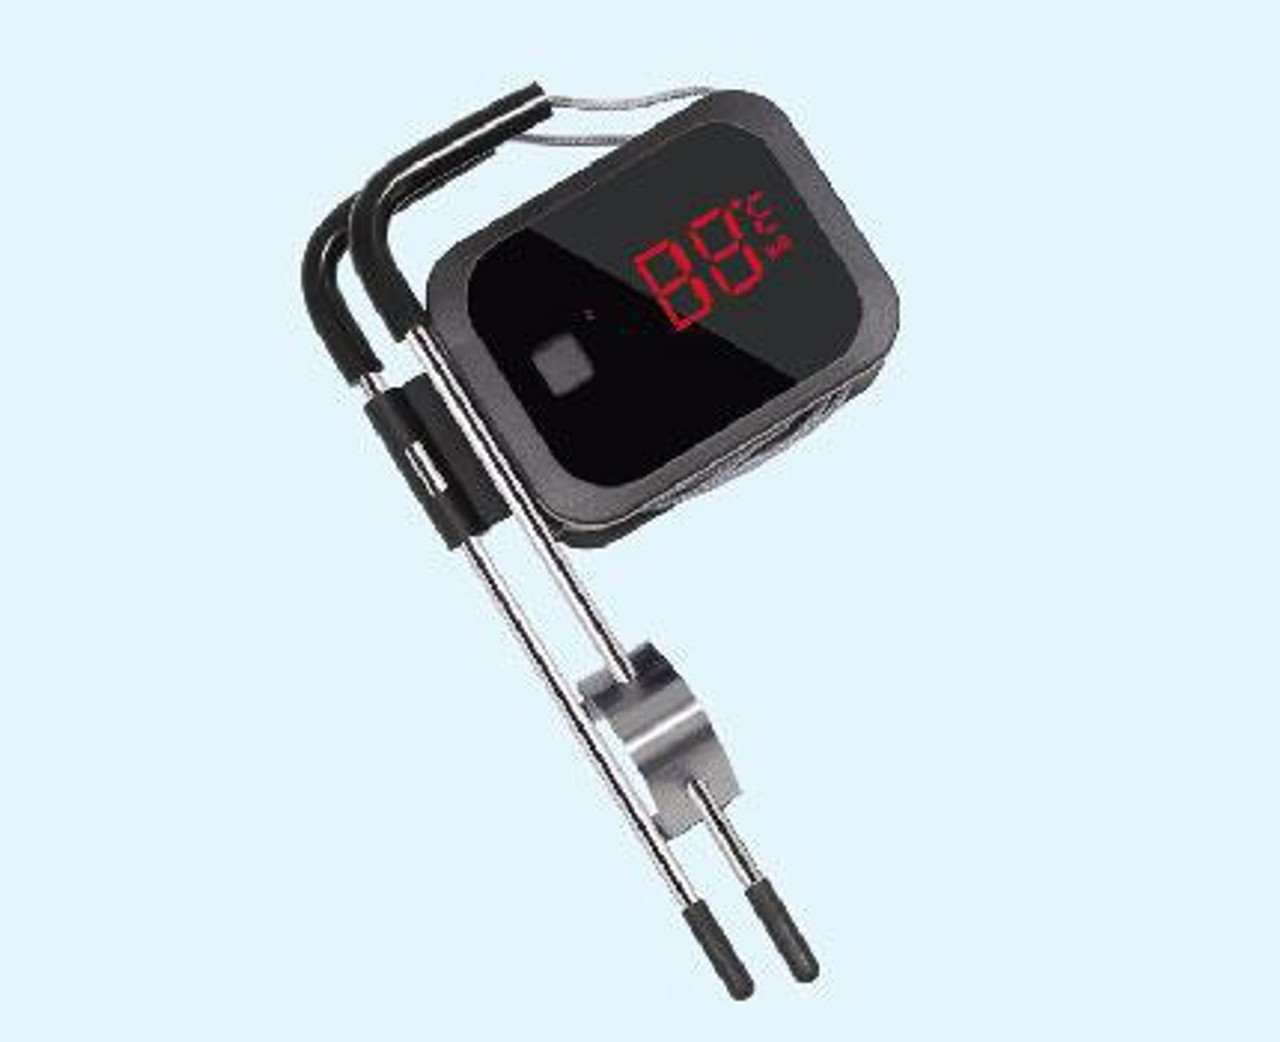 INKBIRD Wifi Meat Thermometer + Instant Read Thermoemter Grill